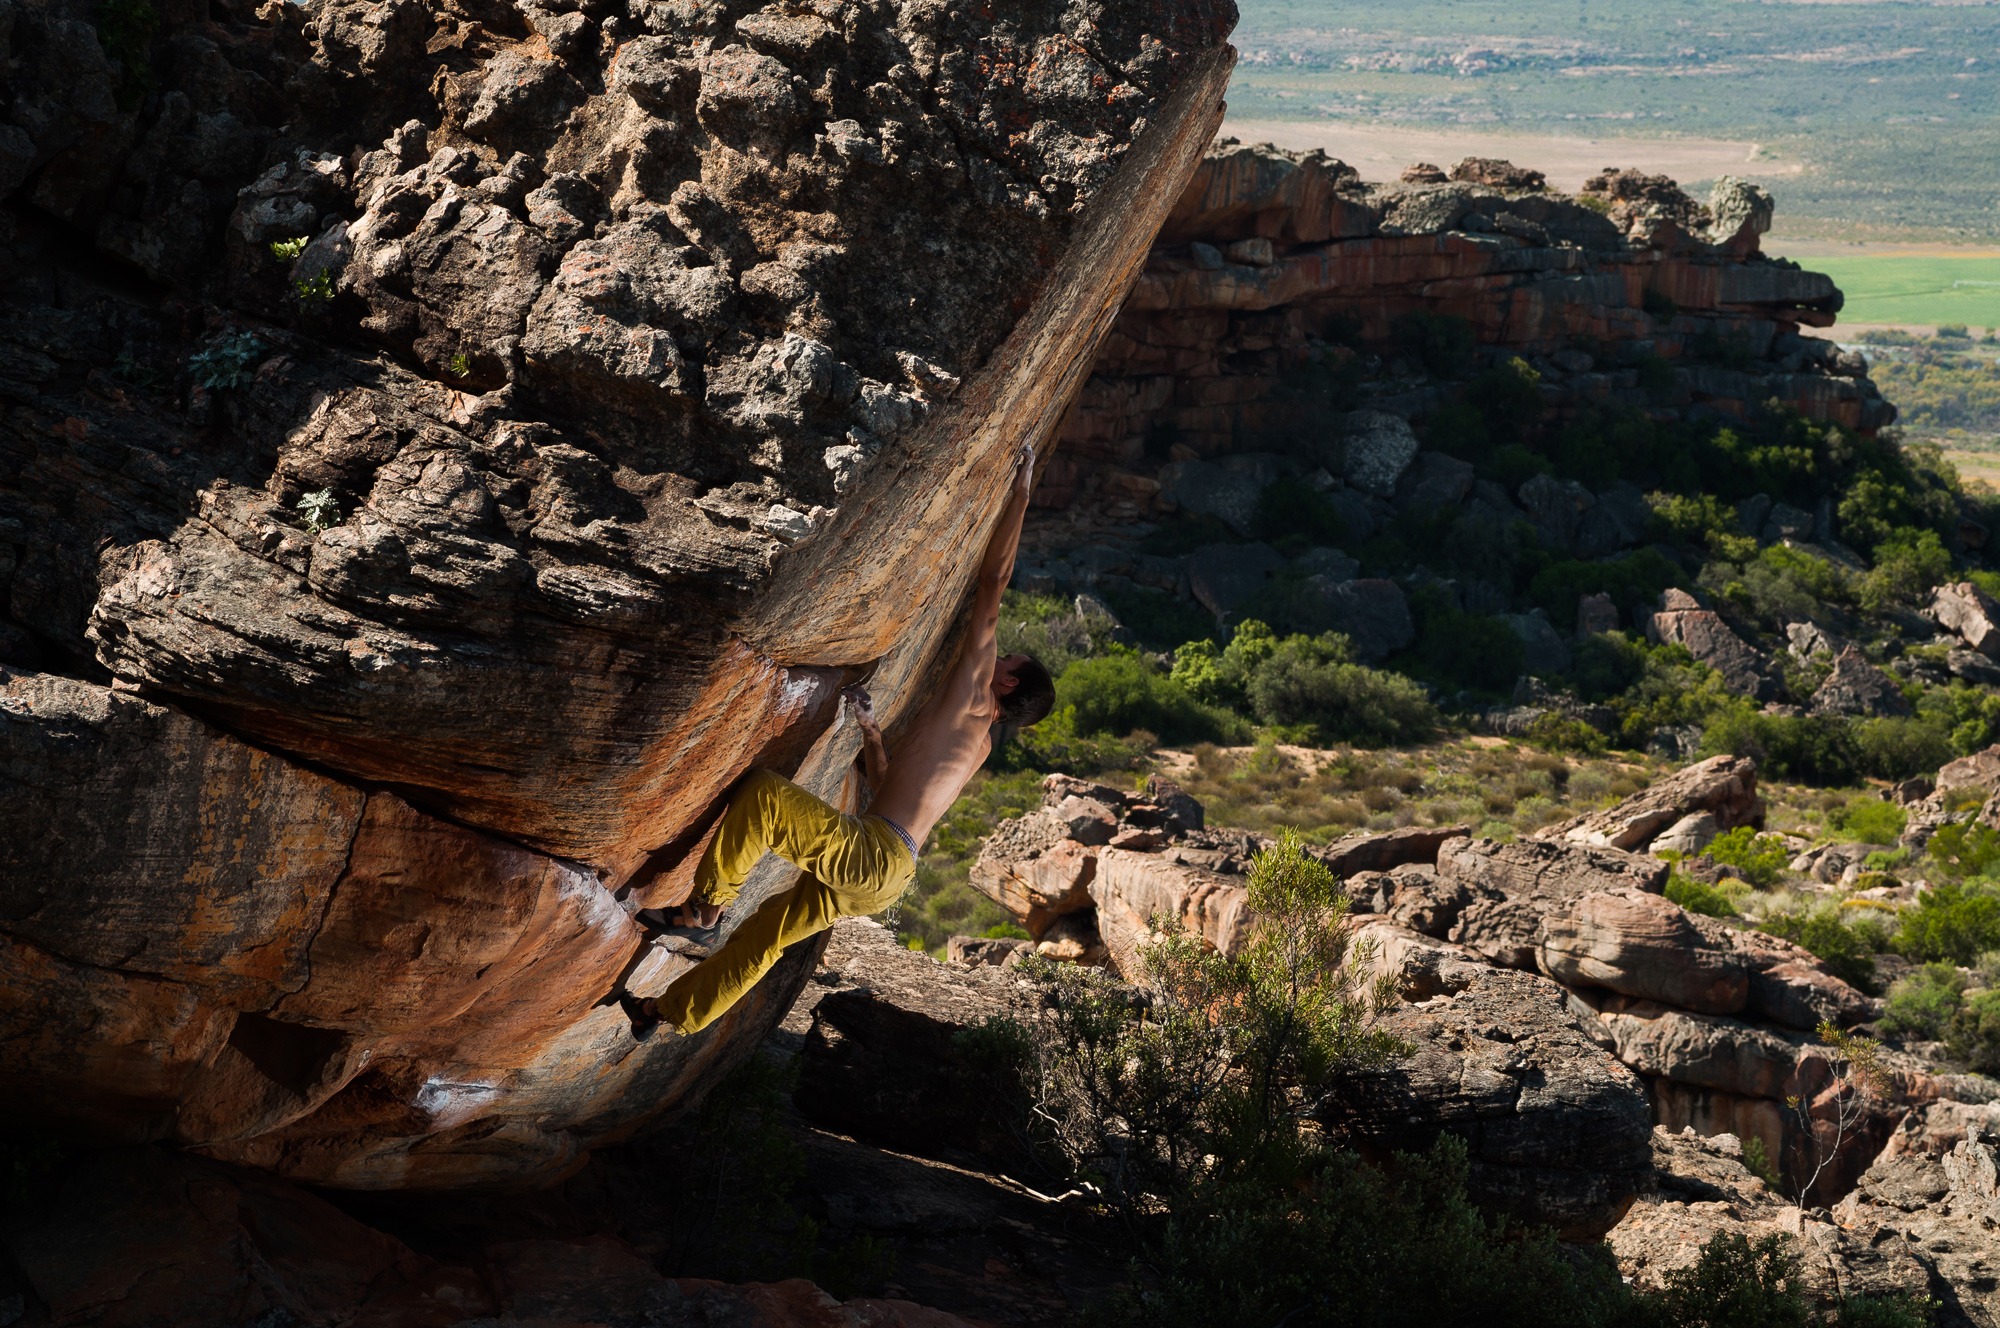 Oliver Vysloužil: Bouldering challenges you to get creative while rock climbing